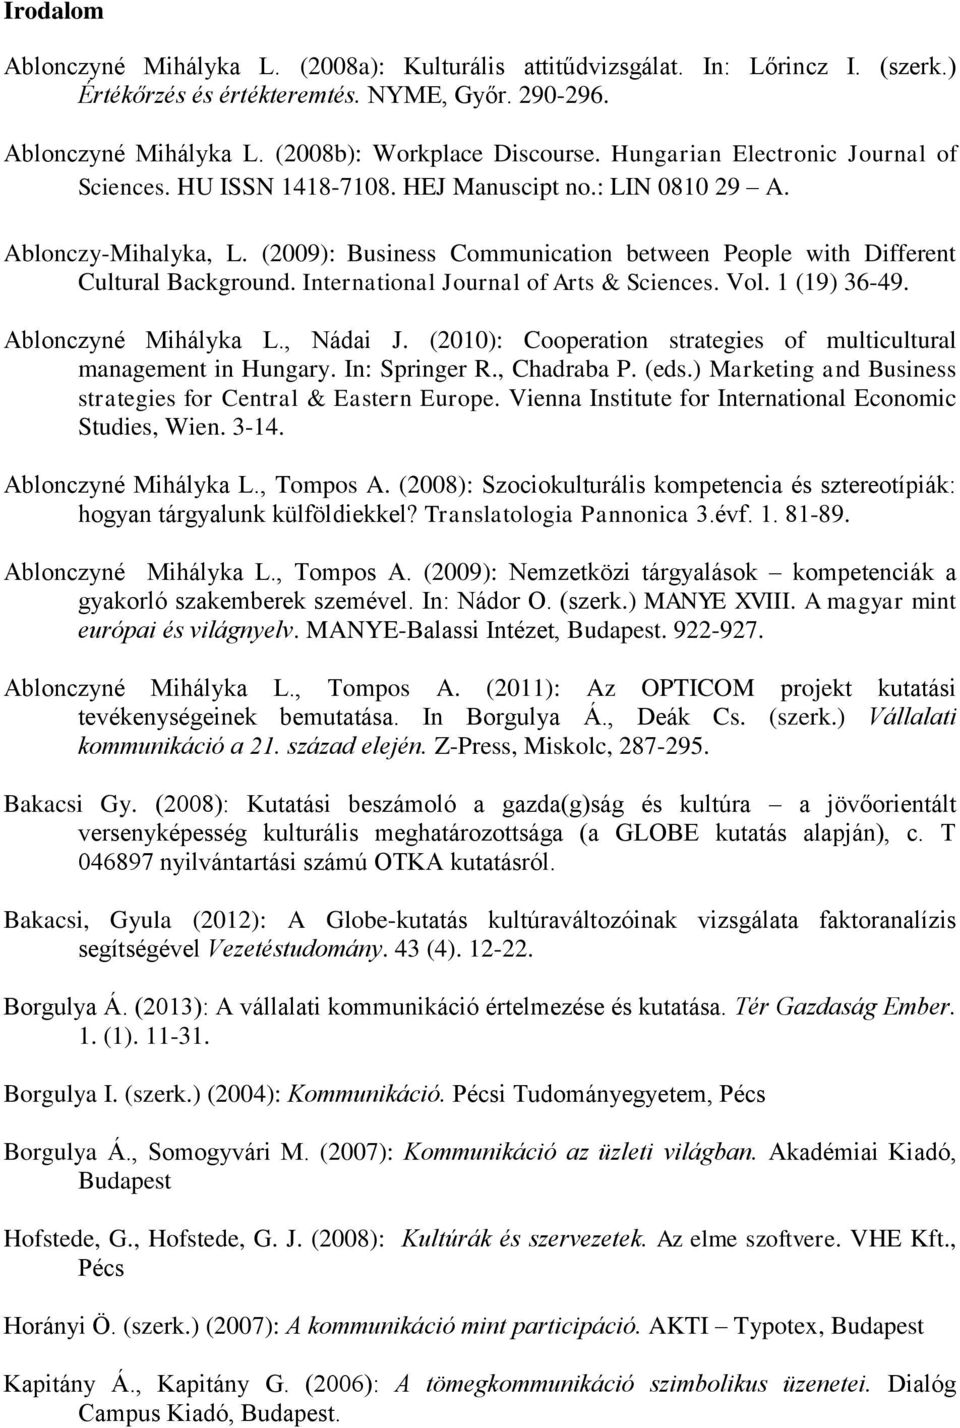 International Journal of Arts & Sciences. Vol. 1 (19) 36-49. Ablonczyné Mihályka L., Nádai J. (2010): Cooperation strategies of multicultural management in Hungary. In: Springer R., Chadraba P. (eds.